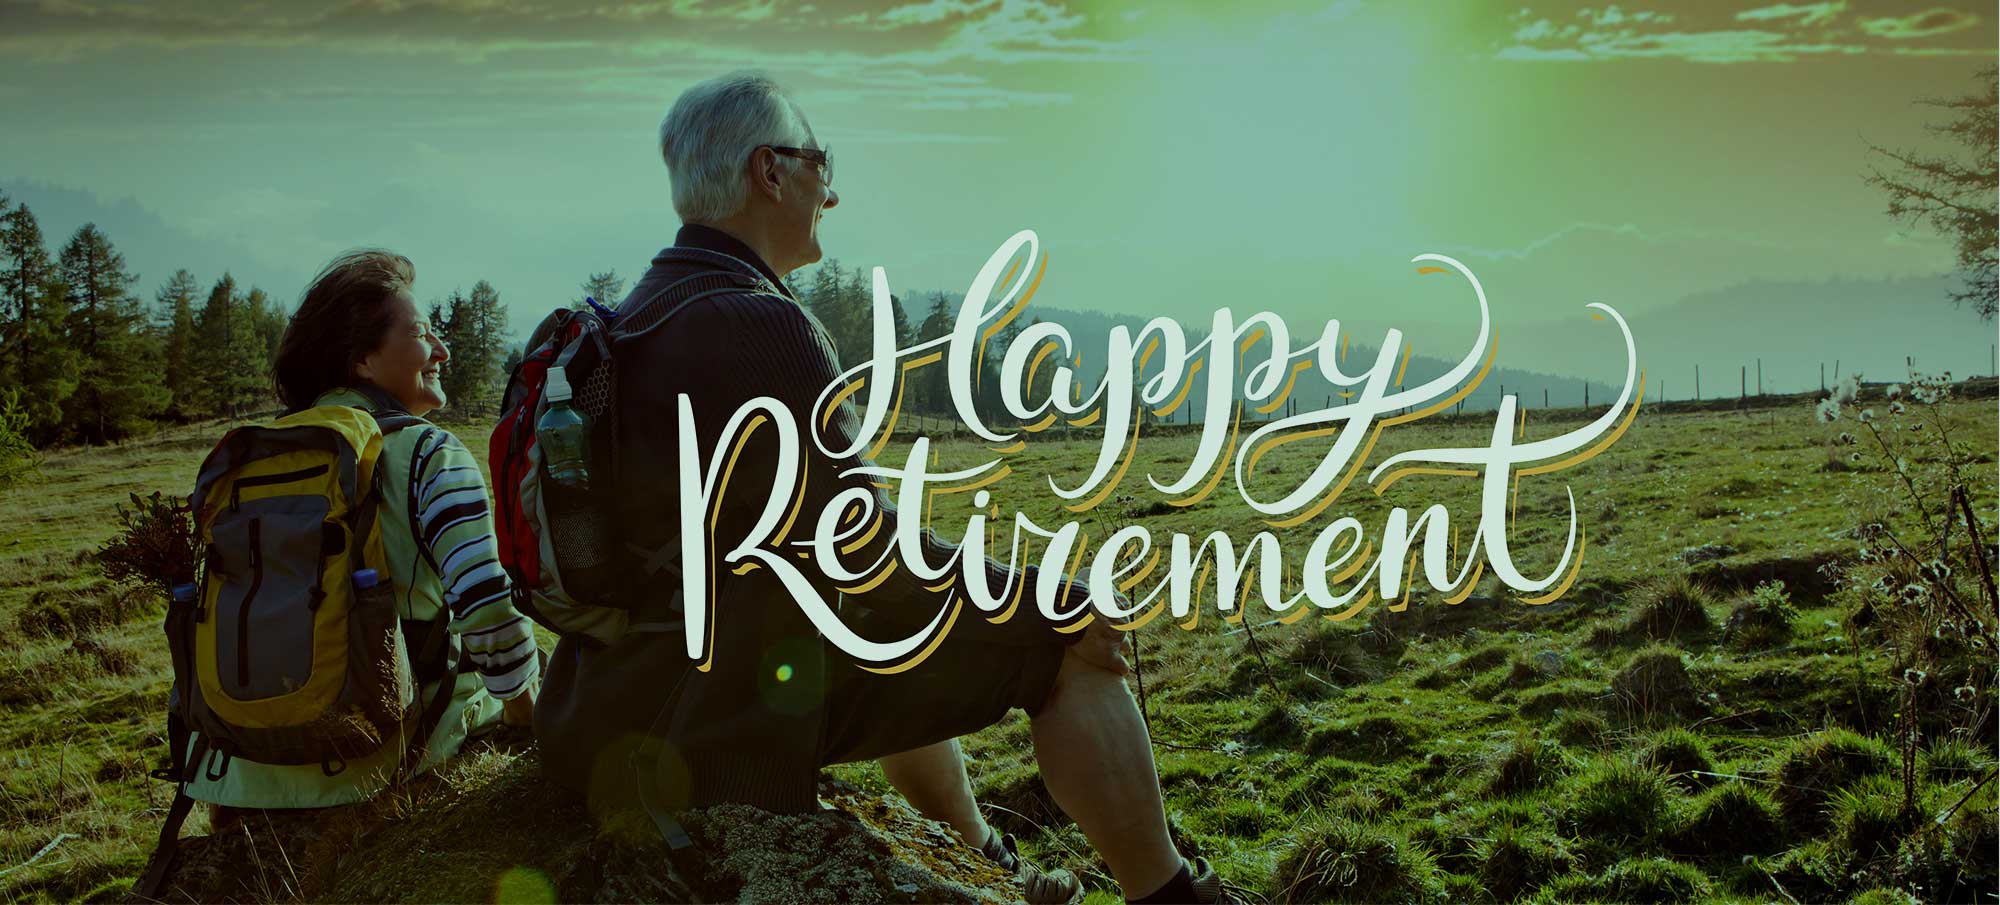 10 Tips for Living a Retirement You Love